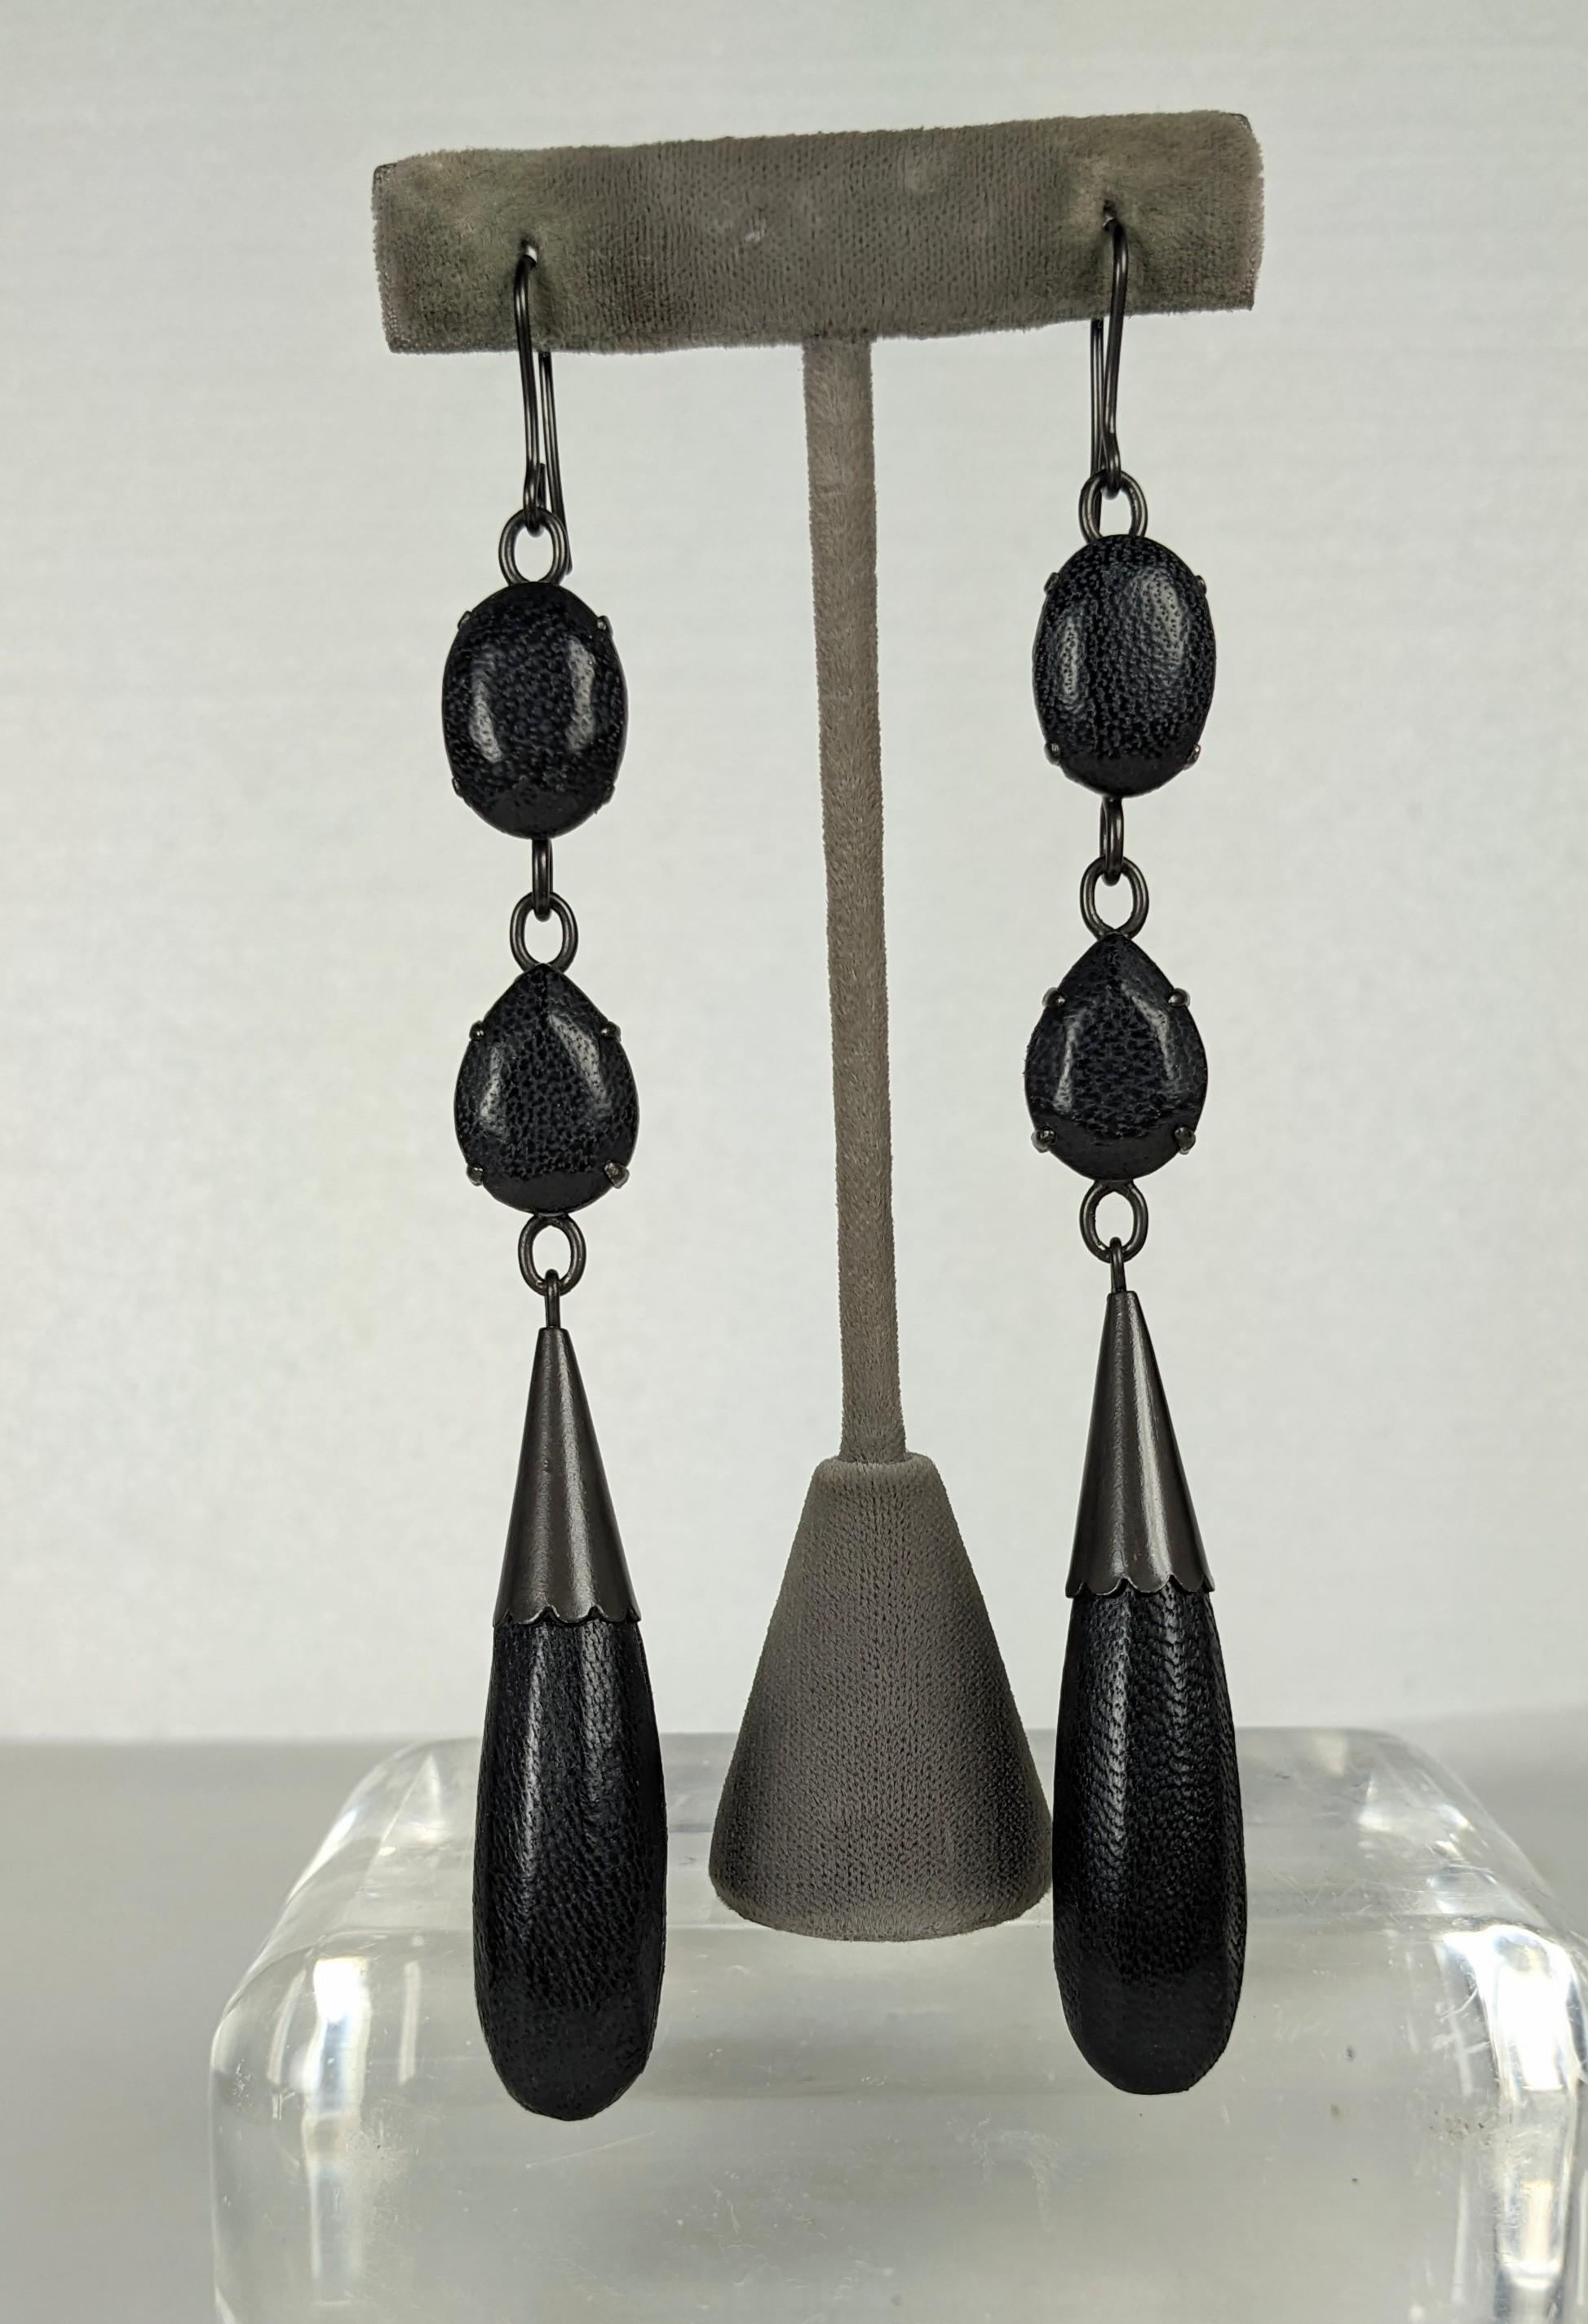 Unusual Jean Paul Gaultier Long Leather Earrings. Composed of oval cabocheons, faceted teardrops and long tear drop pendants, all sheathed in black lamb skin leather. All set in blackened bronze metal. Signed Jean Paul Gaultier, Excellent Condition.